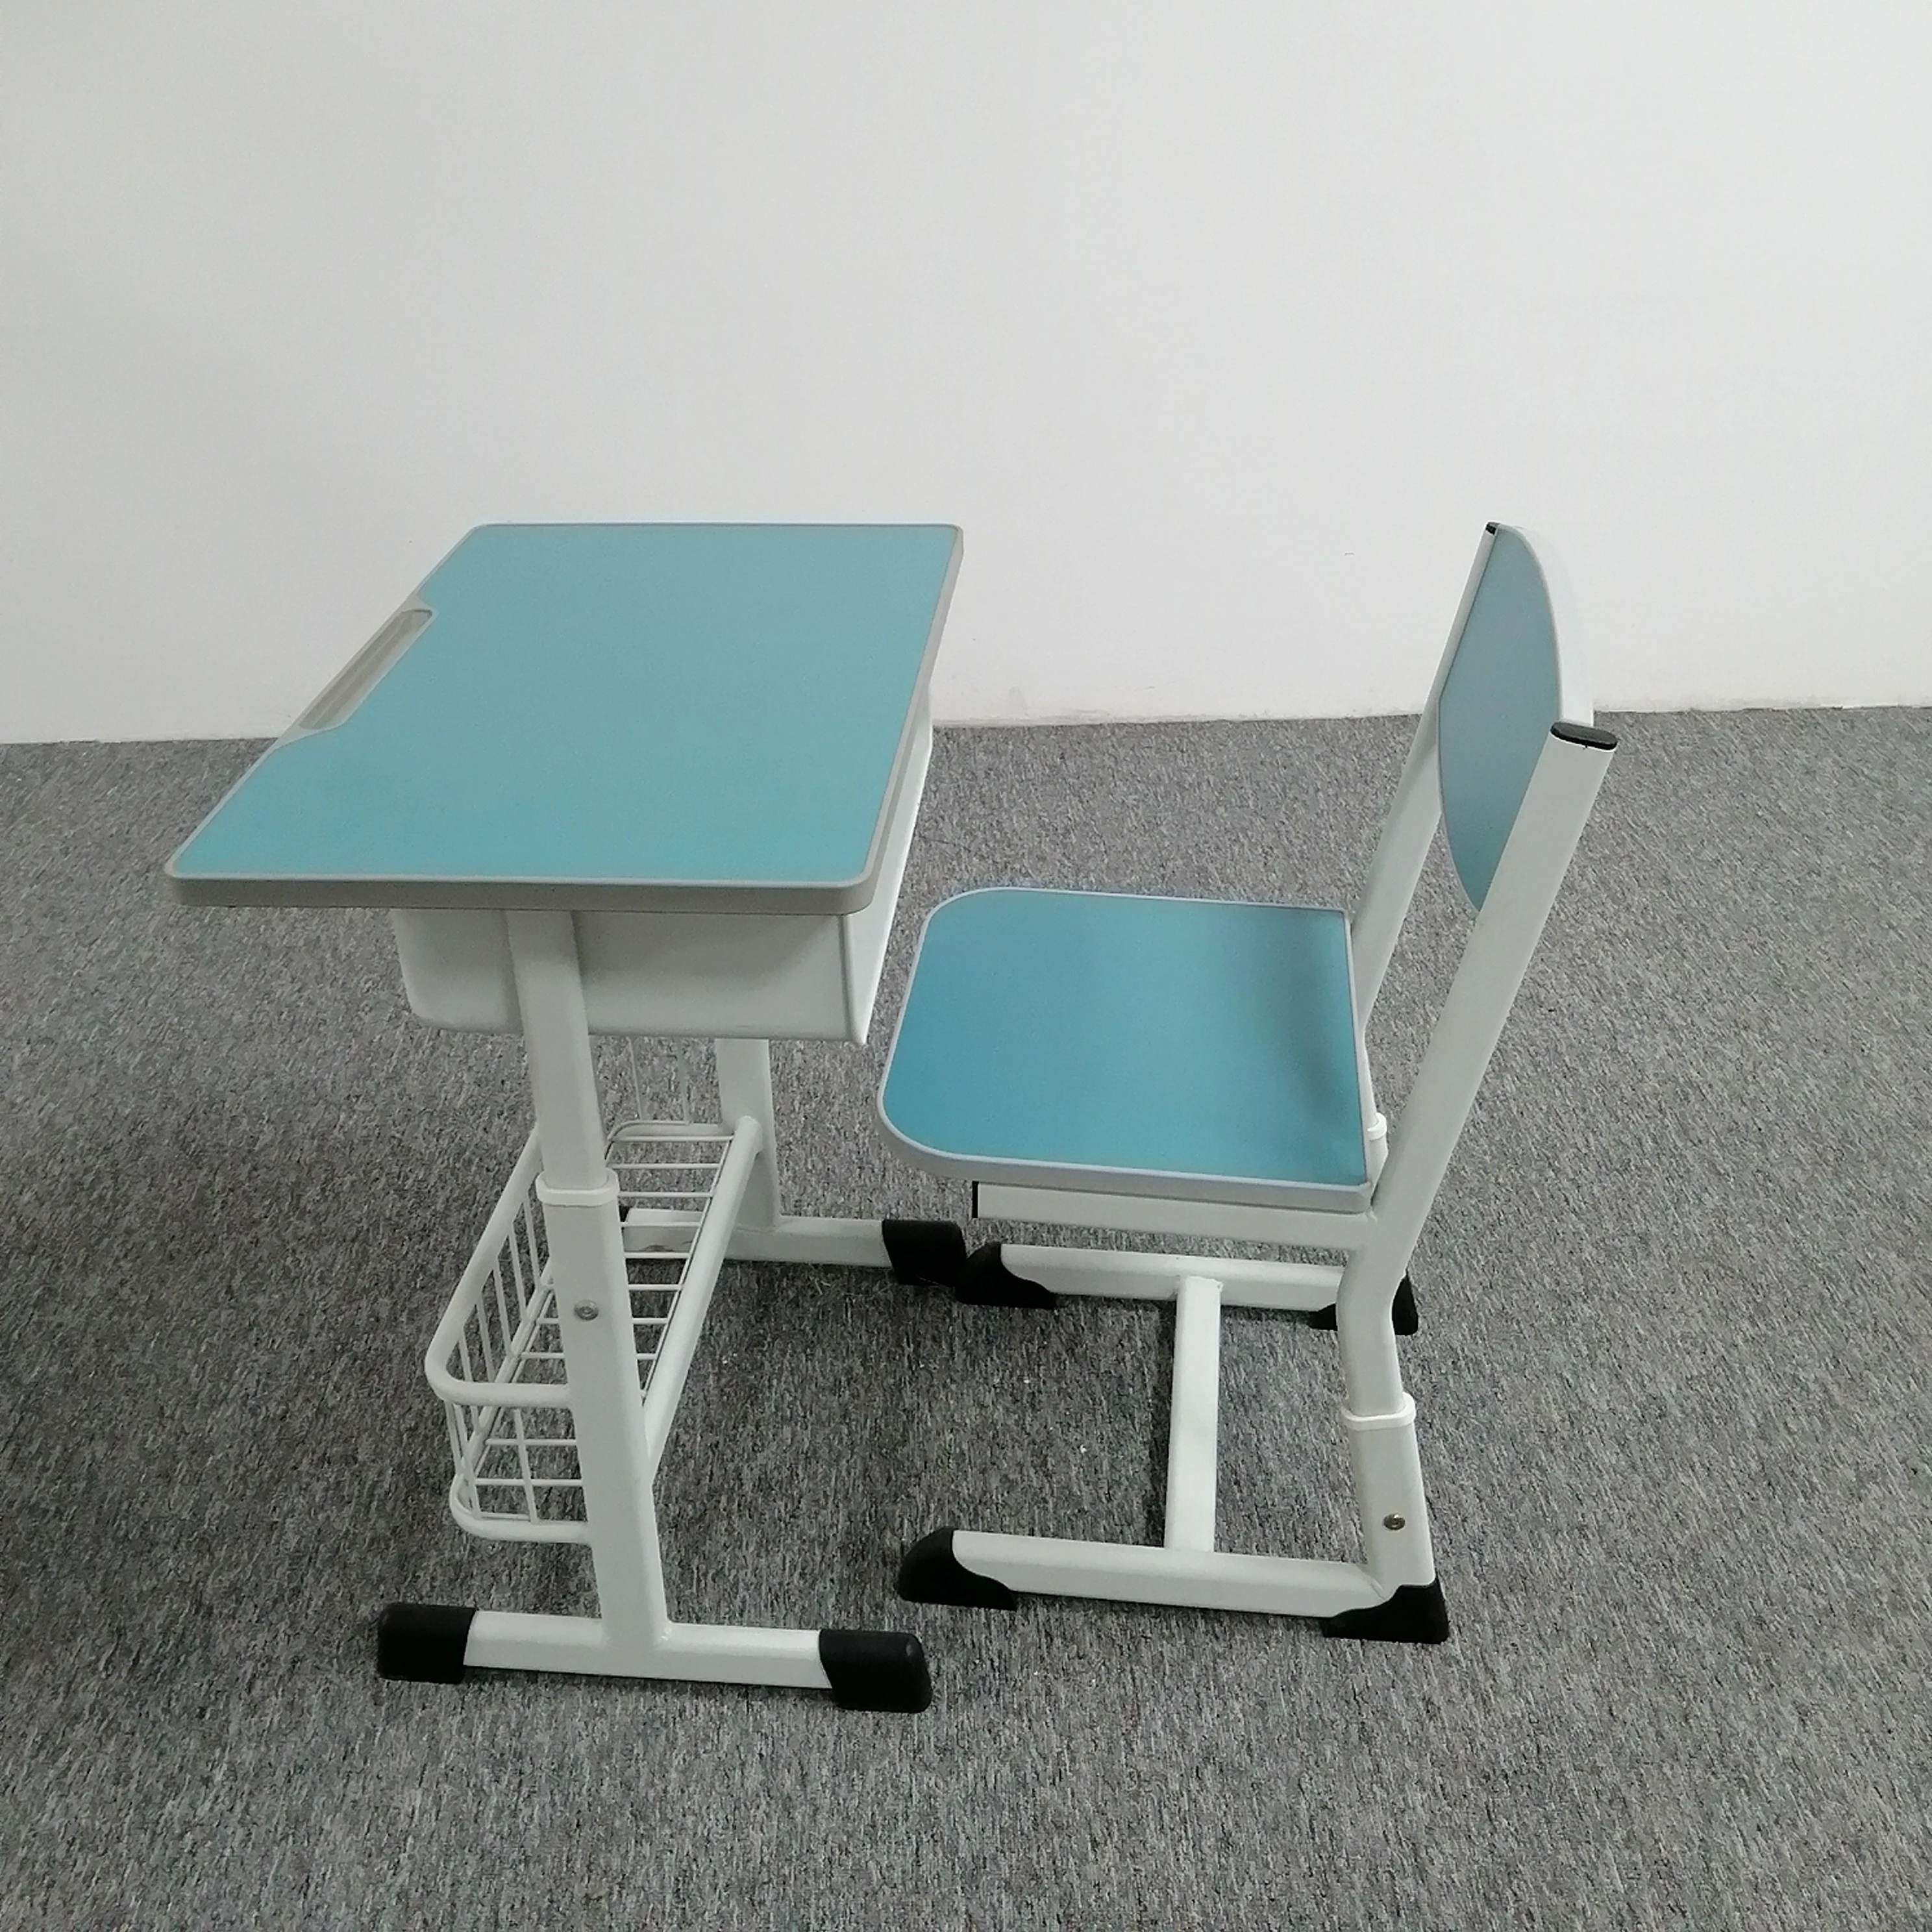 Popular MDF Education Furniture Design Desk with Shelf and Chair Seating Set Classroom School University Student Adult Metal